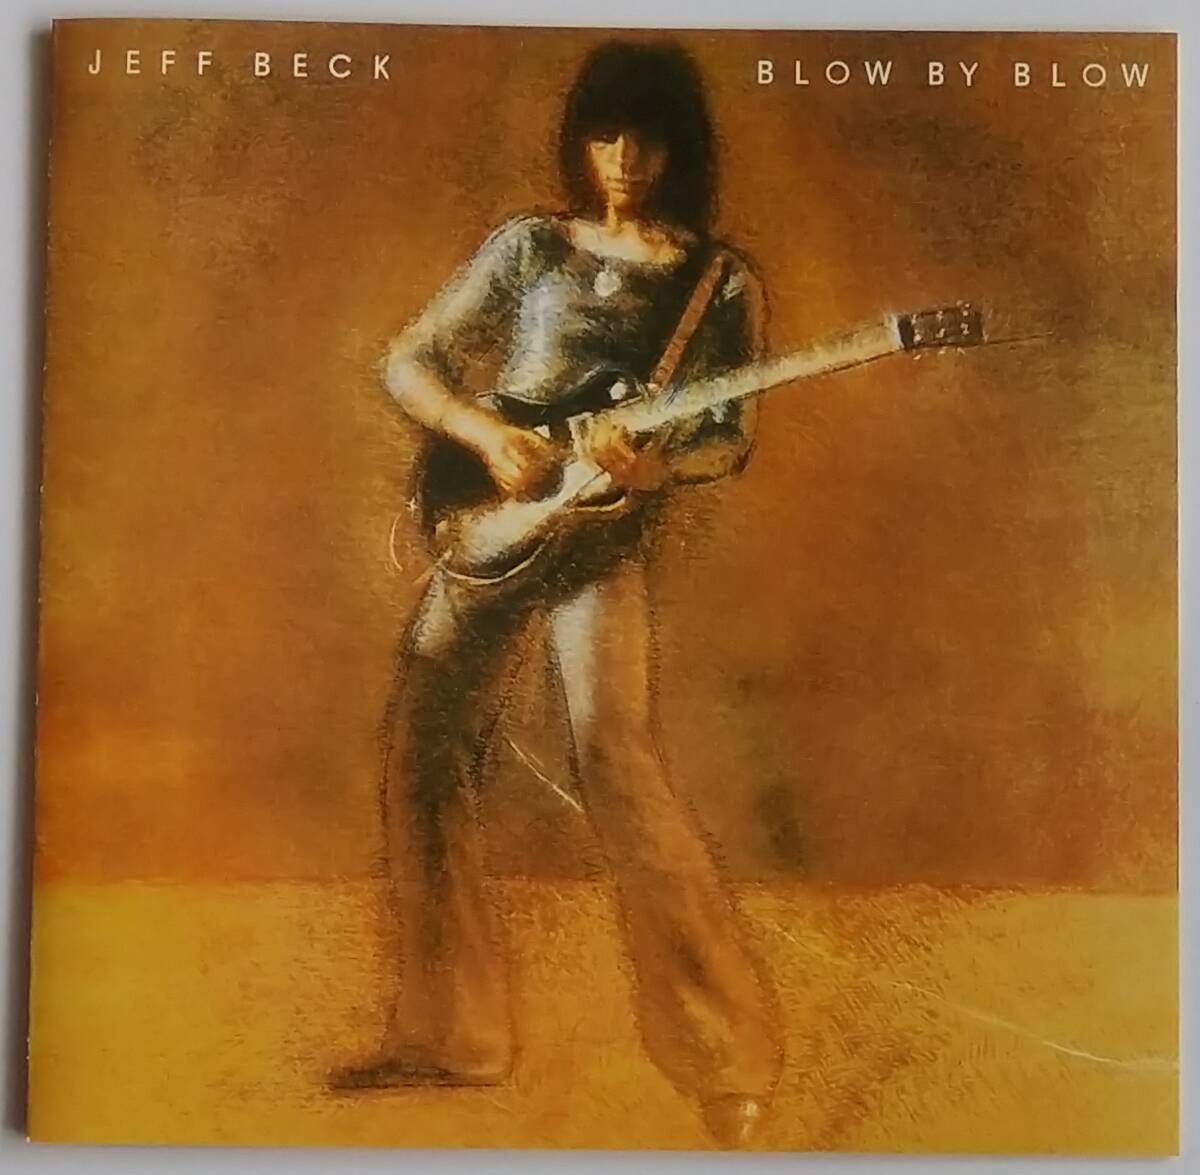 【CD】 Jeff Beck - Blow By Blow / 国内盤 / 送料無料_画像3